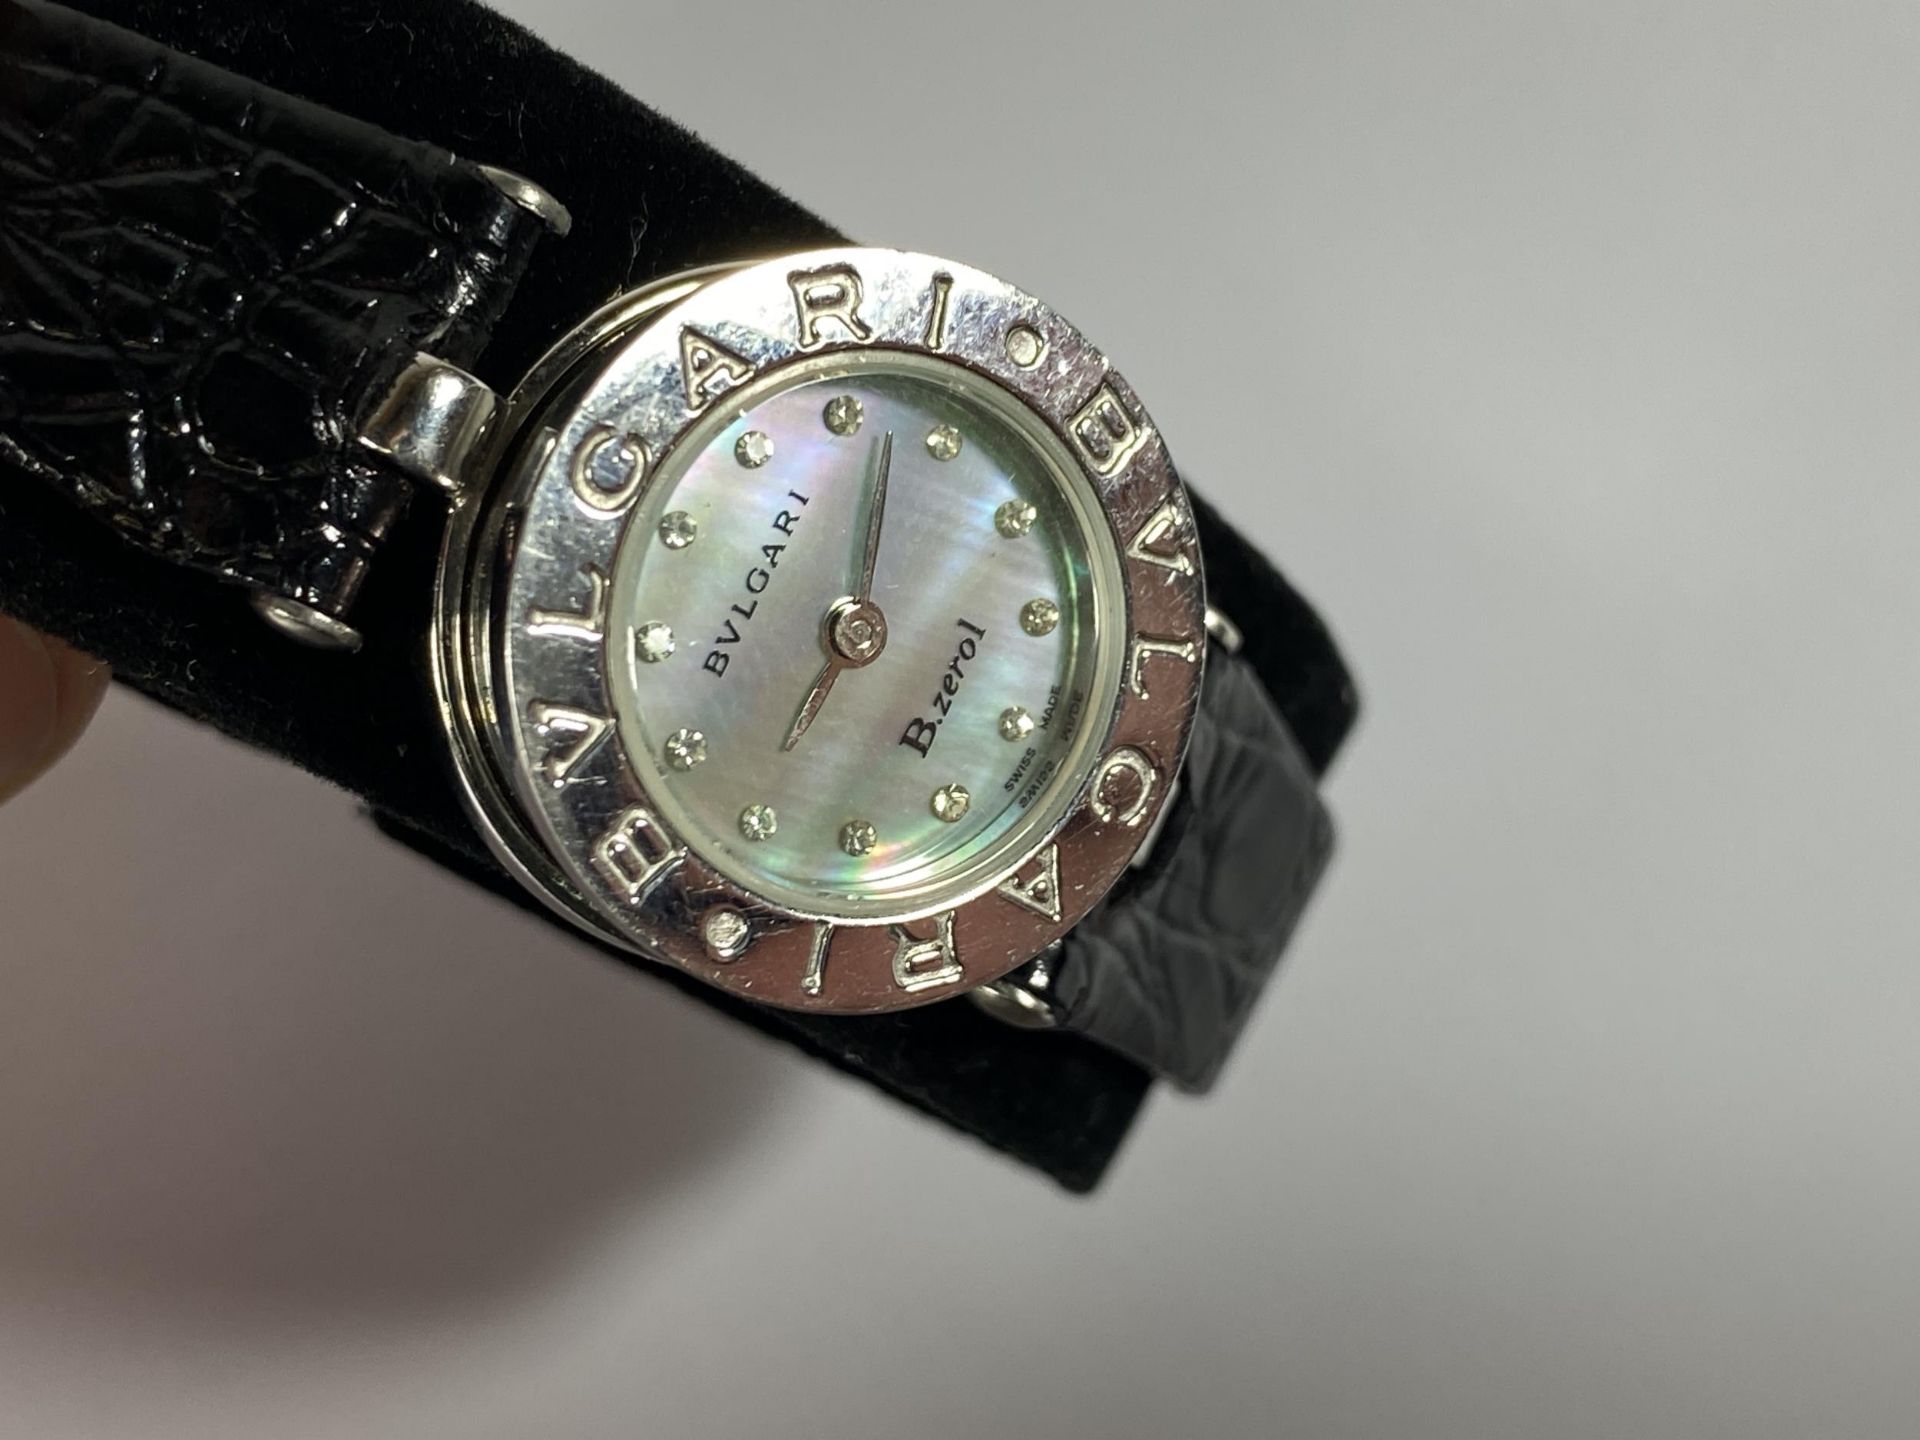 A LADIES BULGARI B. ZERO 1 WATCH WITH MOTHER OF PEARL BLUE DIAL - Image 3 of 3